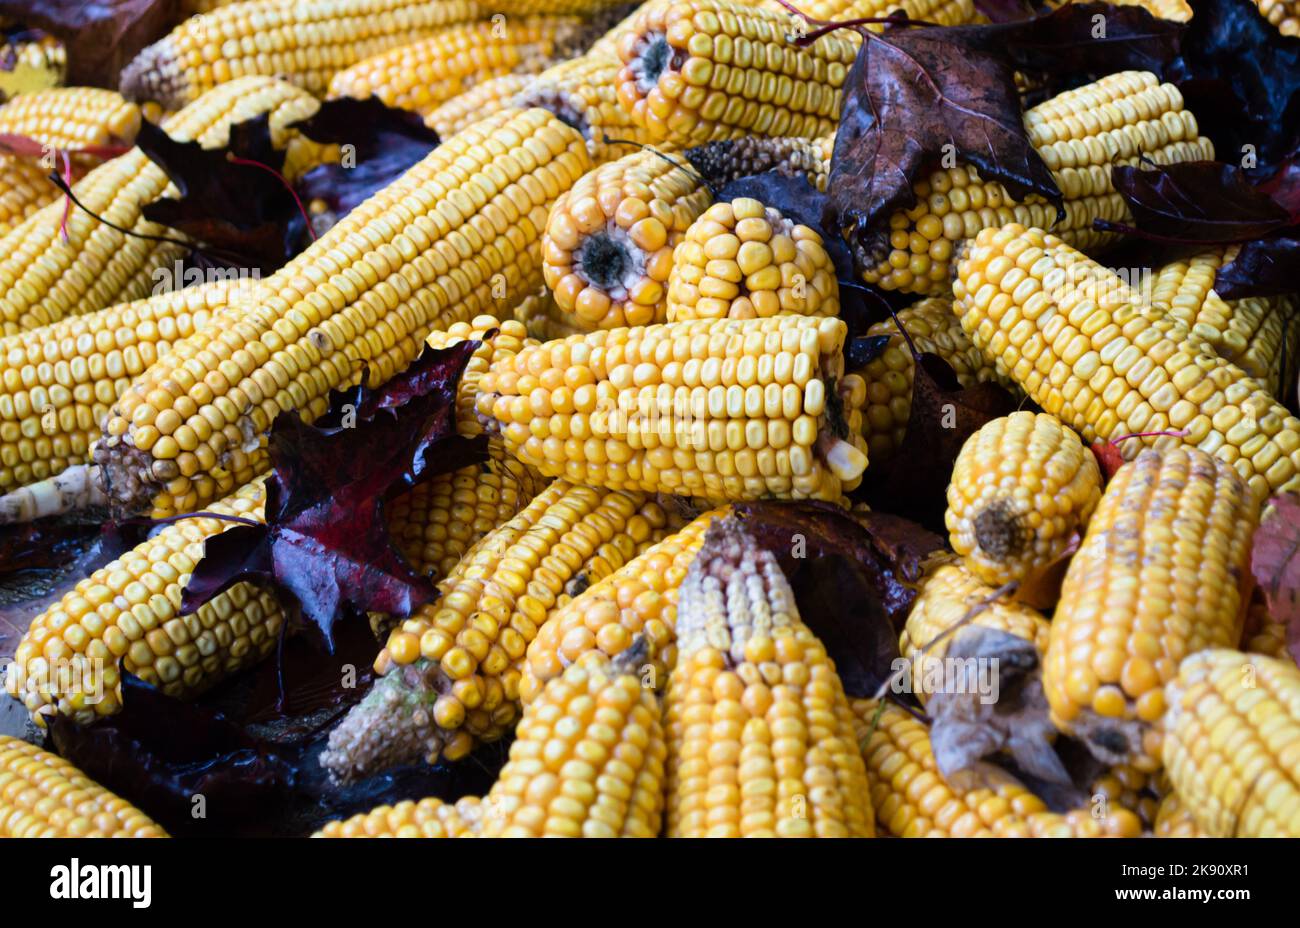 Pile of yellow corn on the cob with leaves on top Stock Photo